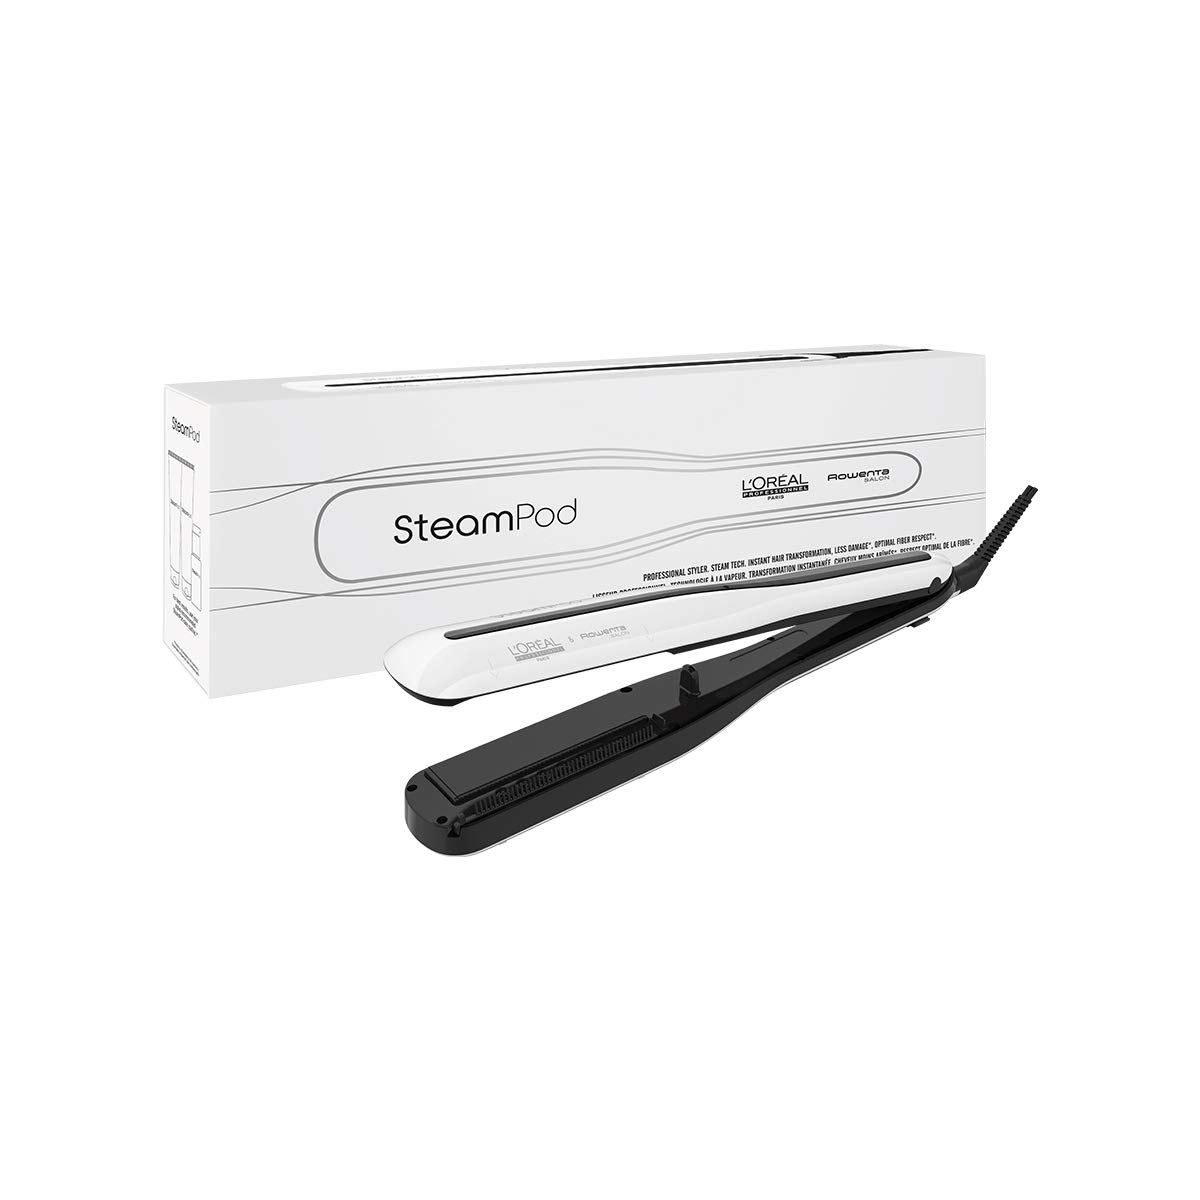 LOreal Professionnel Paris| SteamPod 3.0 - Professional steam hair styler for natural waves or straight hair, heat control